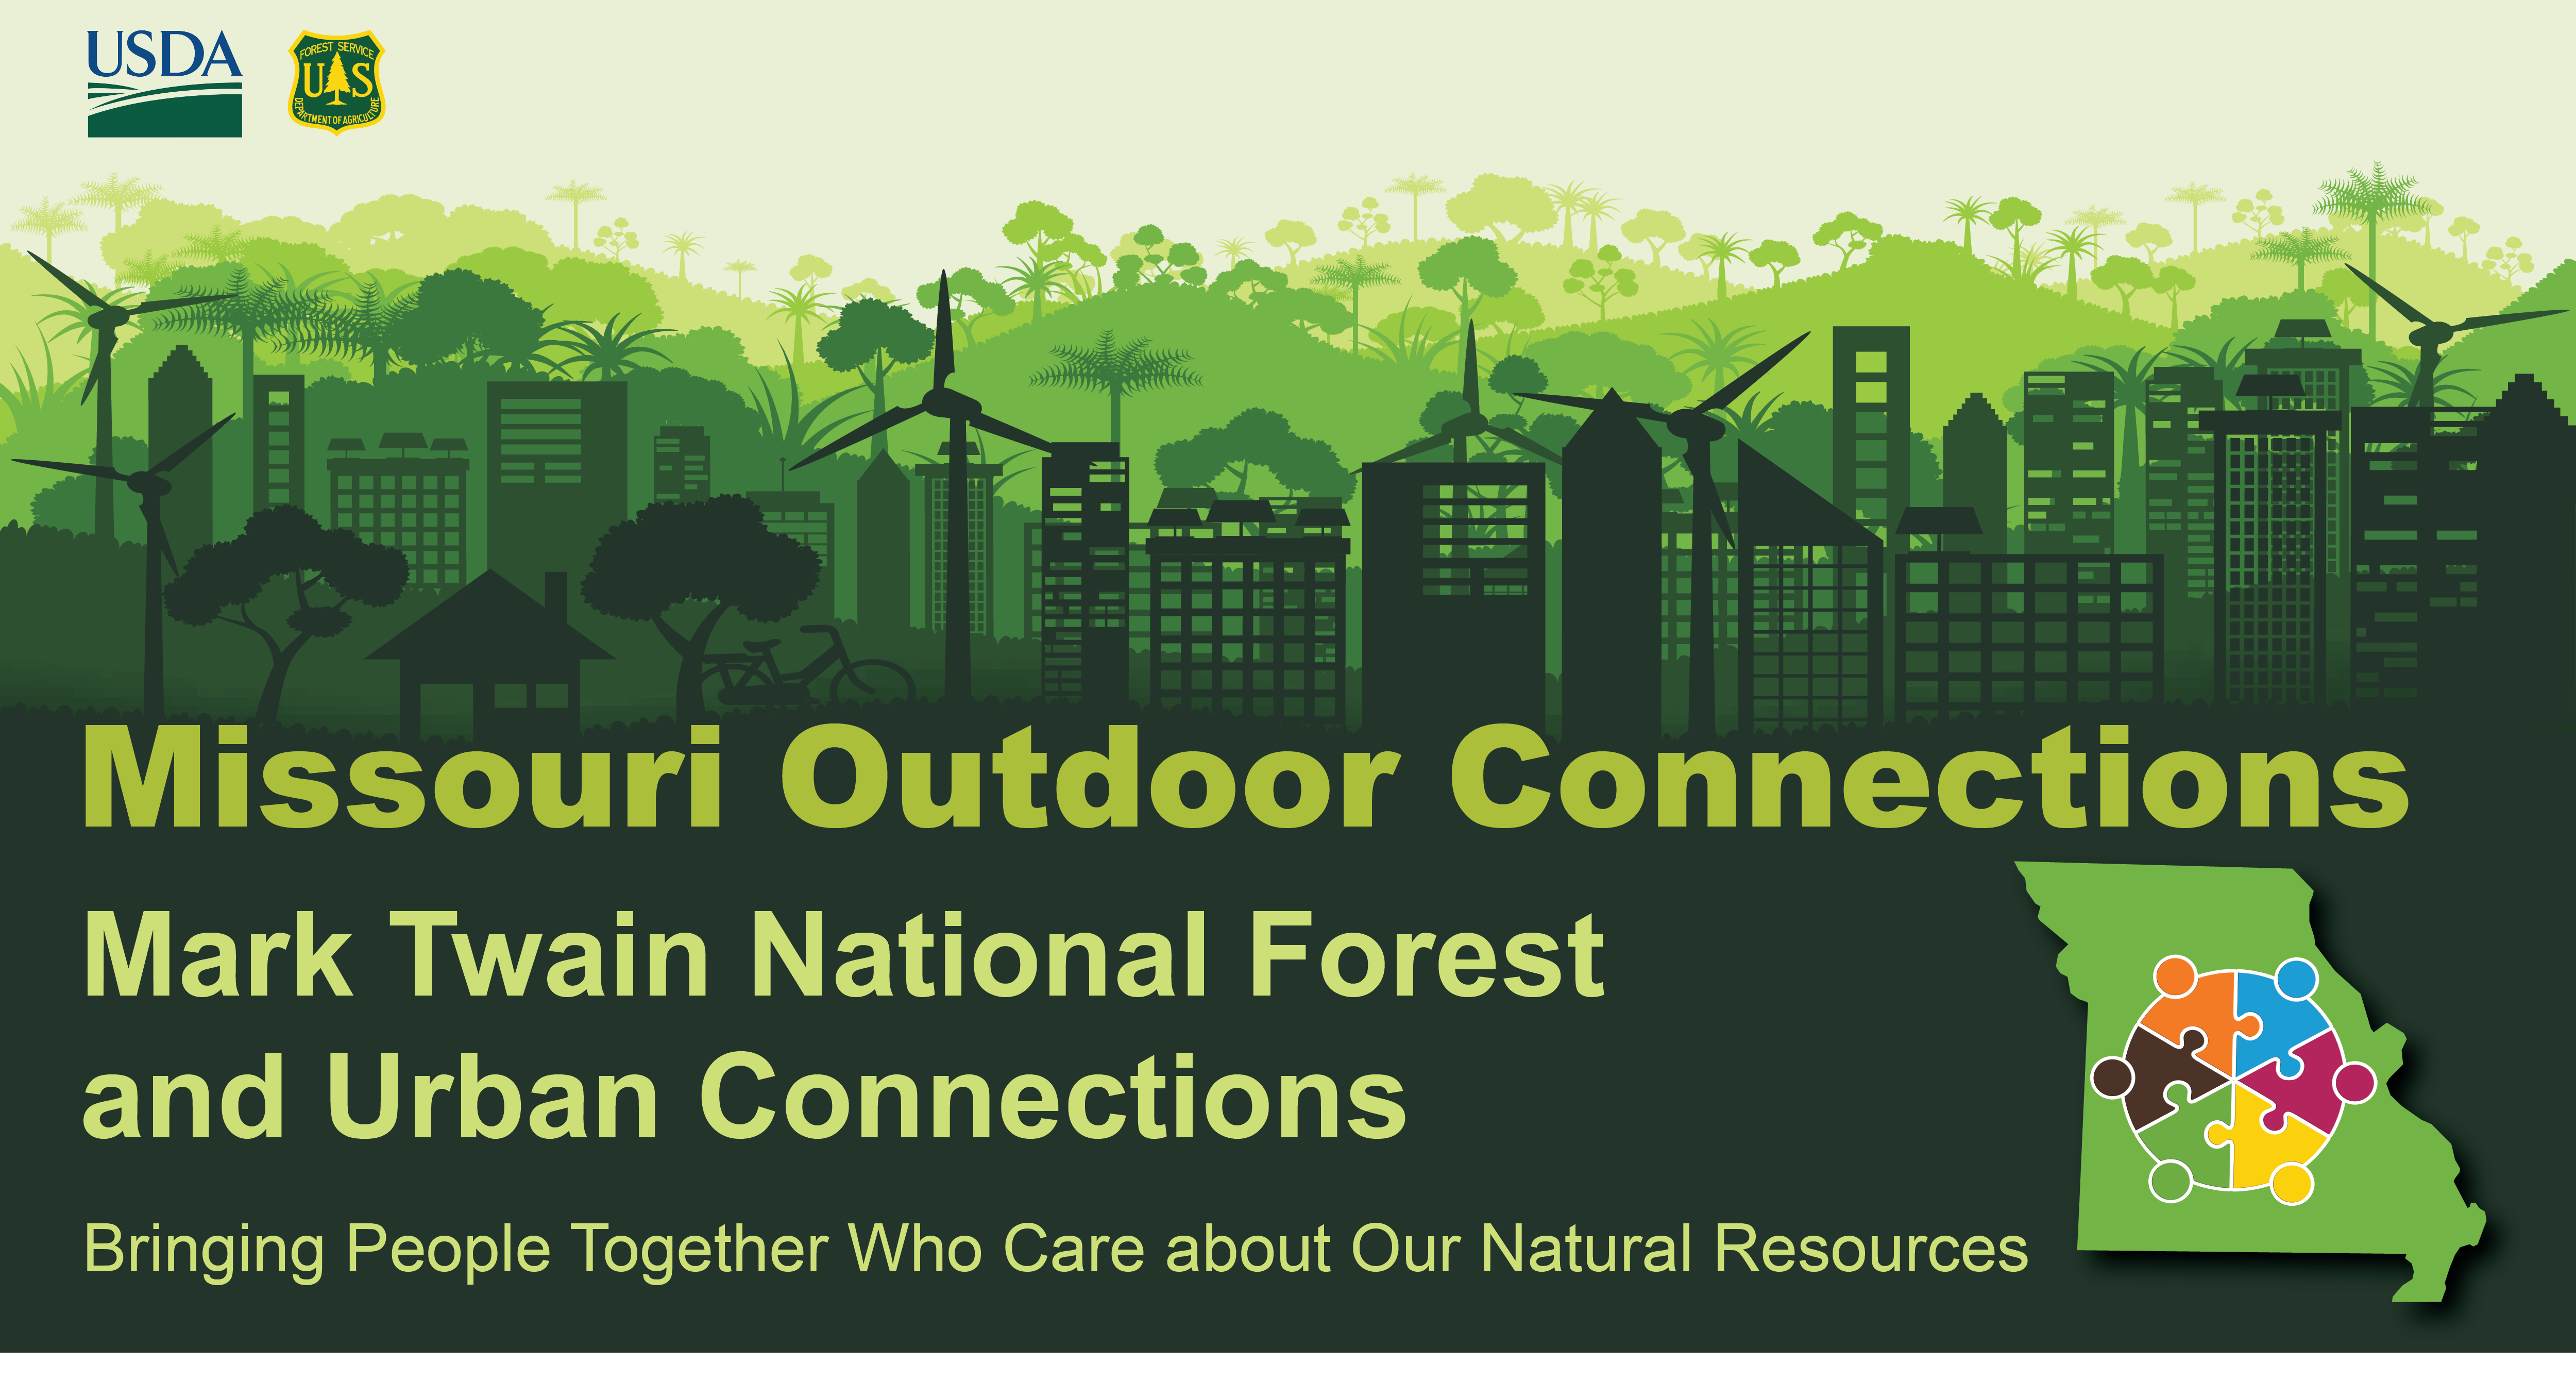 Missouri Outdoor Connections, Mark Twain National Forest and Urban Connections. Bringing people together who care about our natural resources.